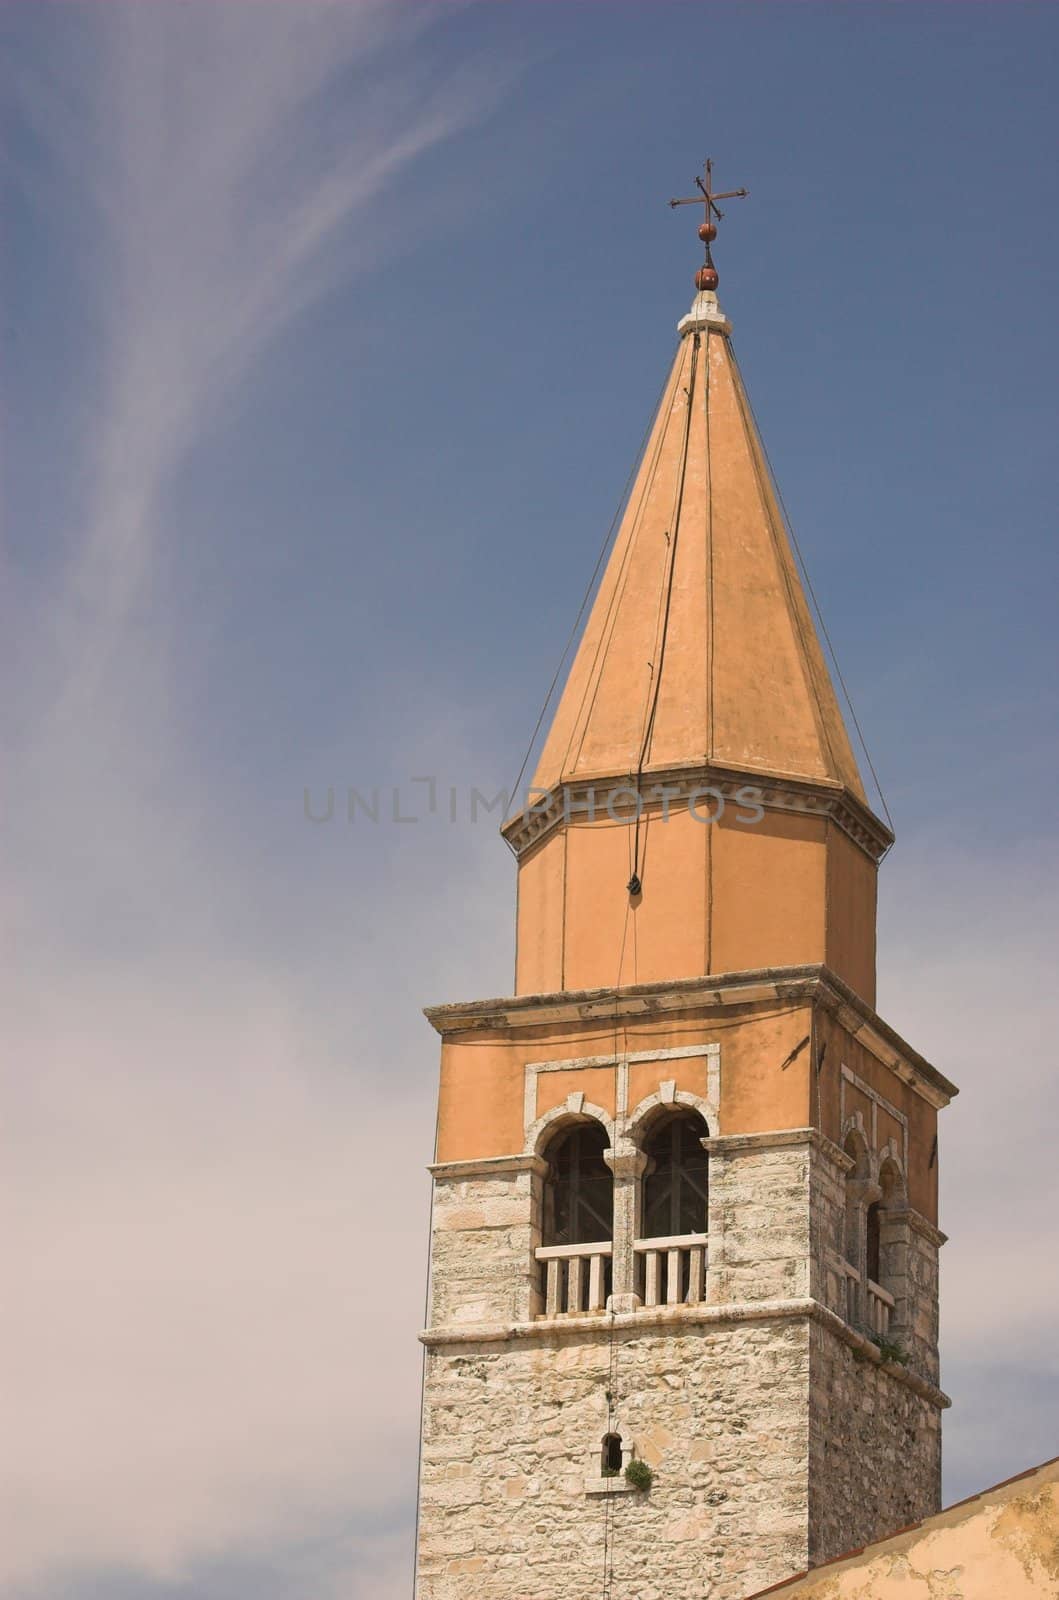 A view woth the church tower of Umag, Croatia